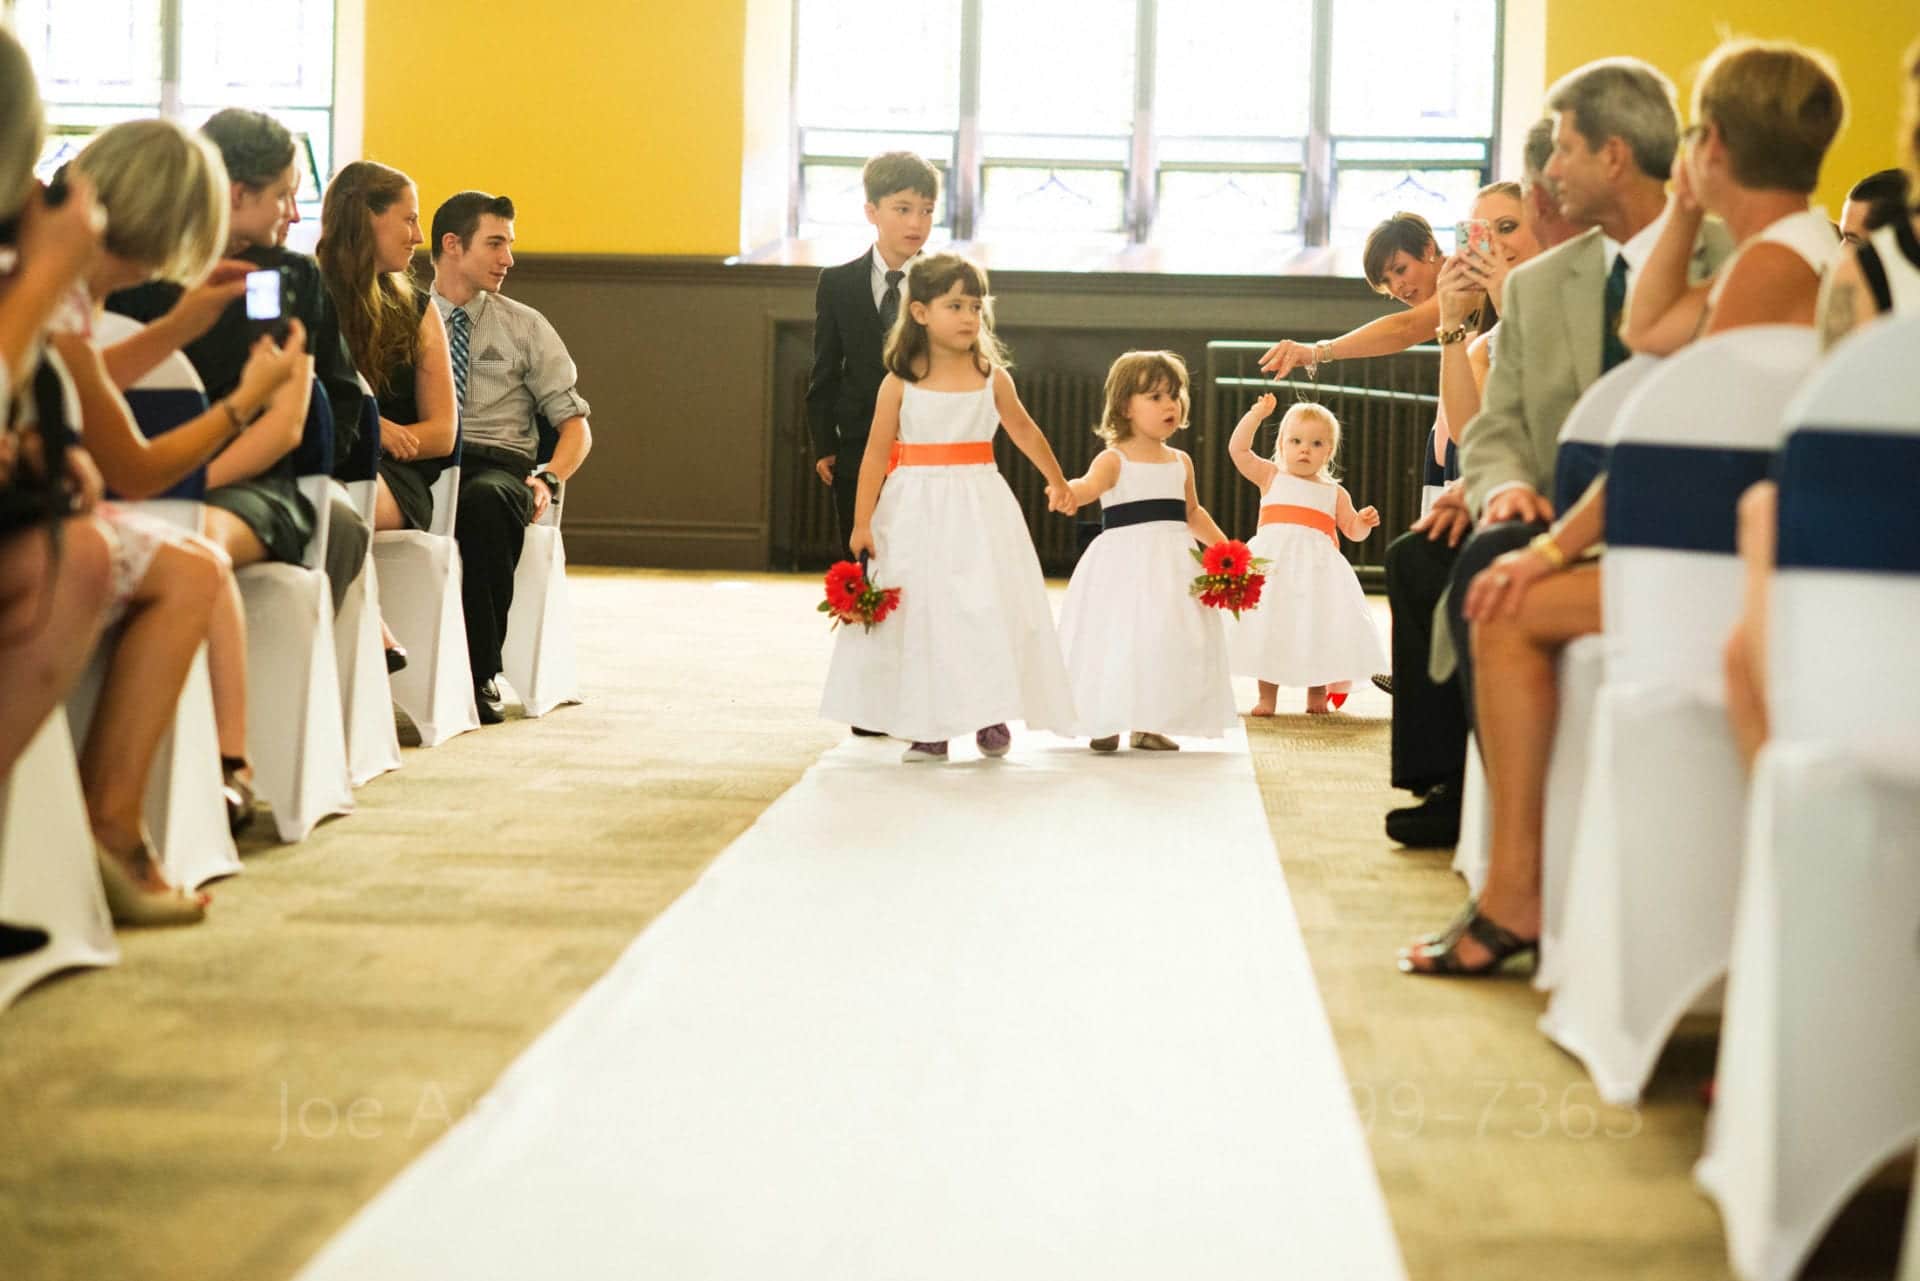 Three little girls in white dresses and a boy in a suit are encouraged to walk down the aisle at a wedding.